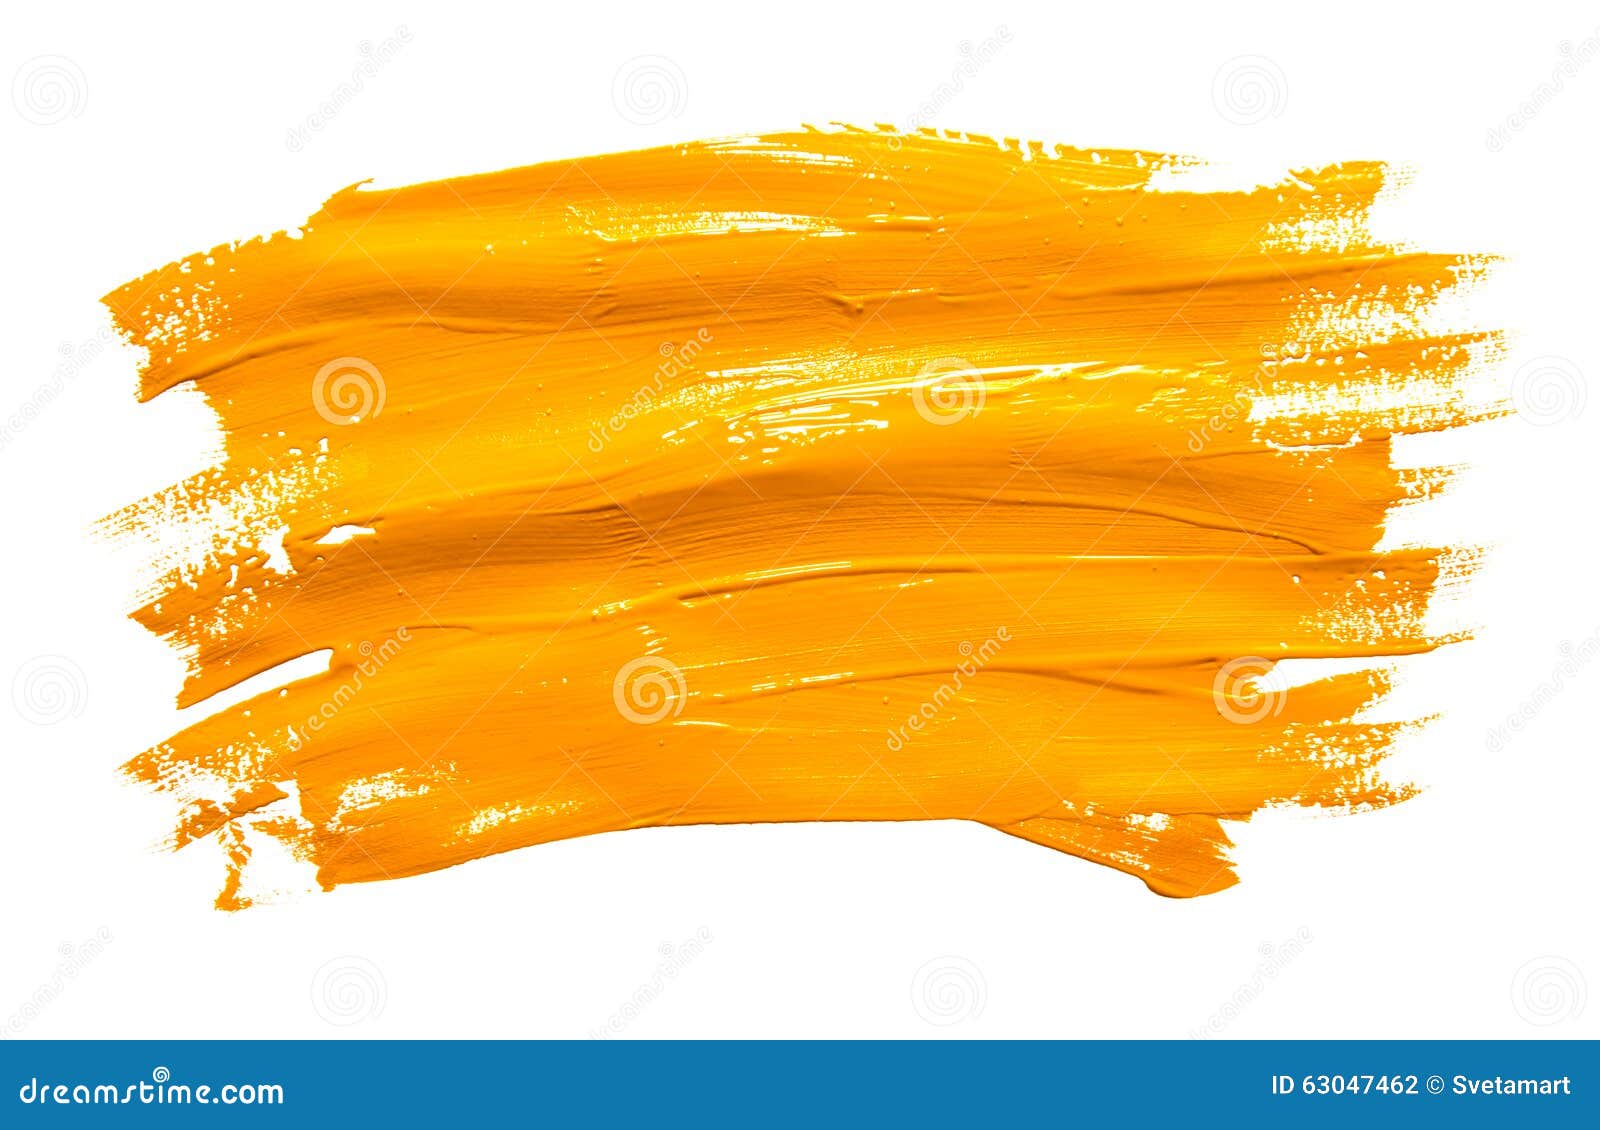 Paint Brush Stroke Texture Ochre Watercolor Stock Photo - Image of